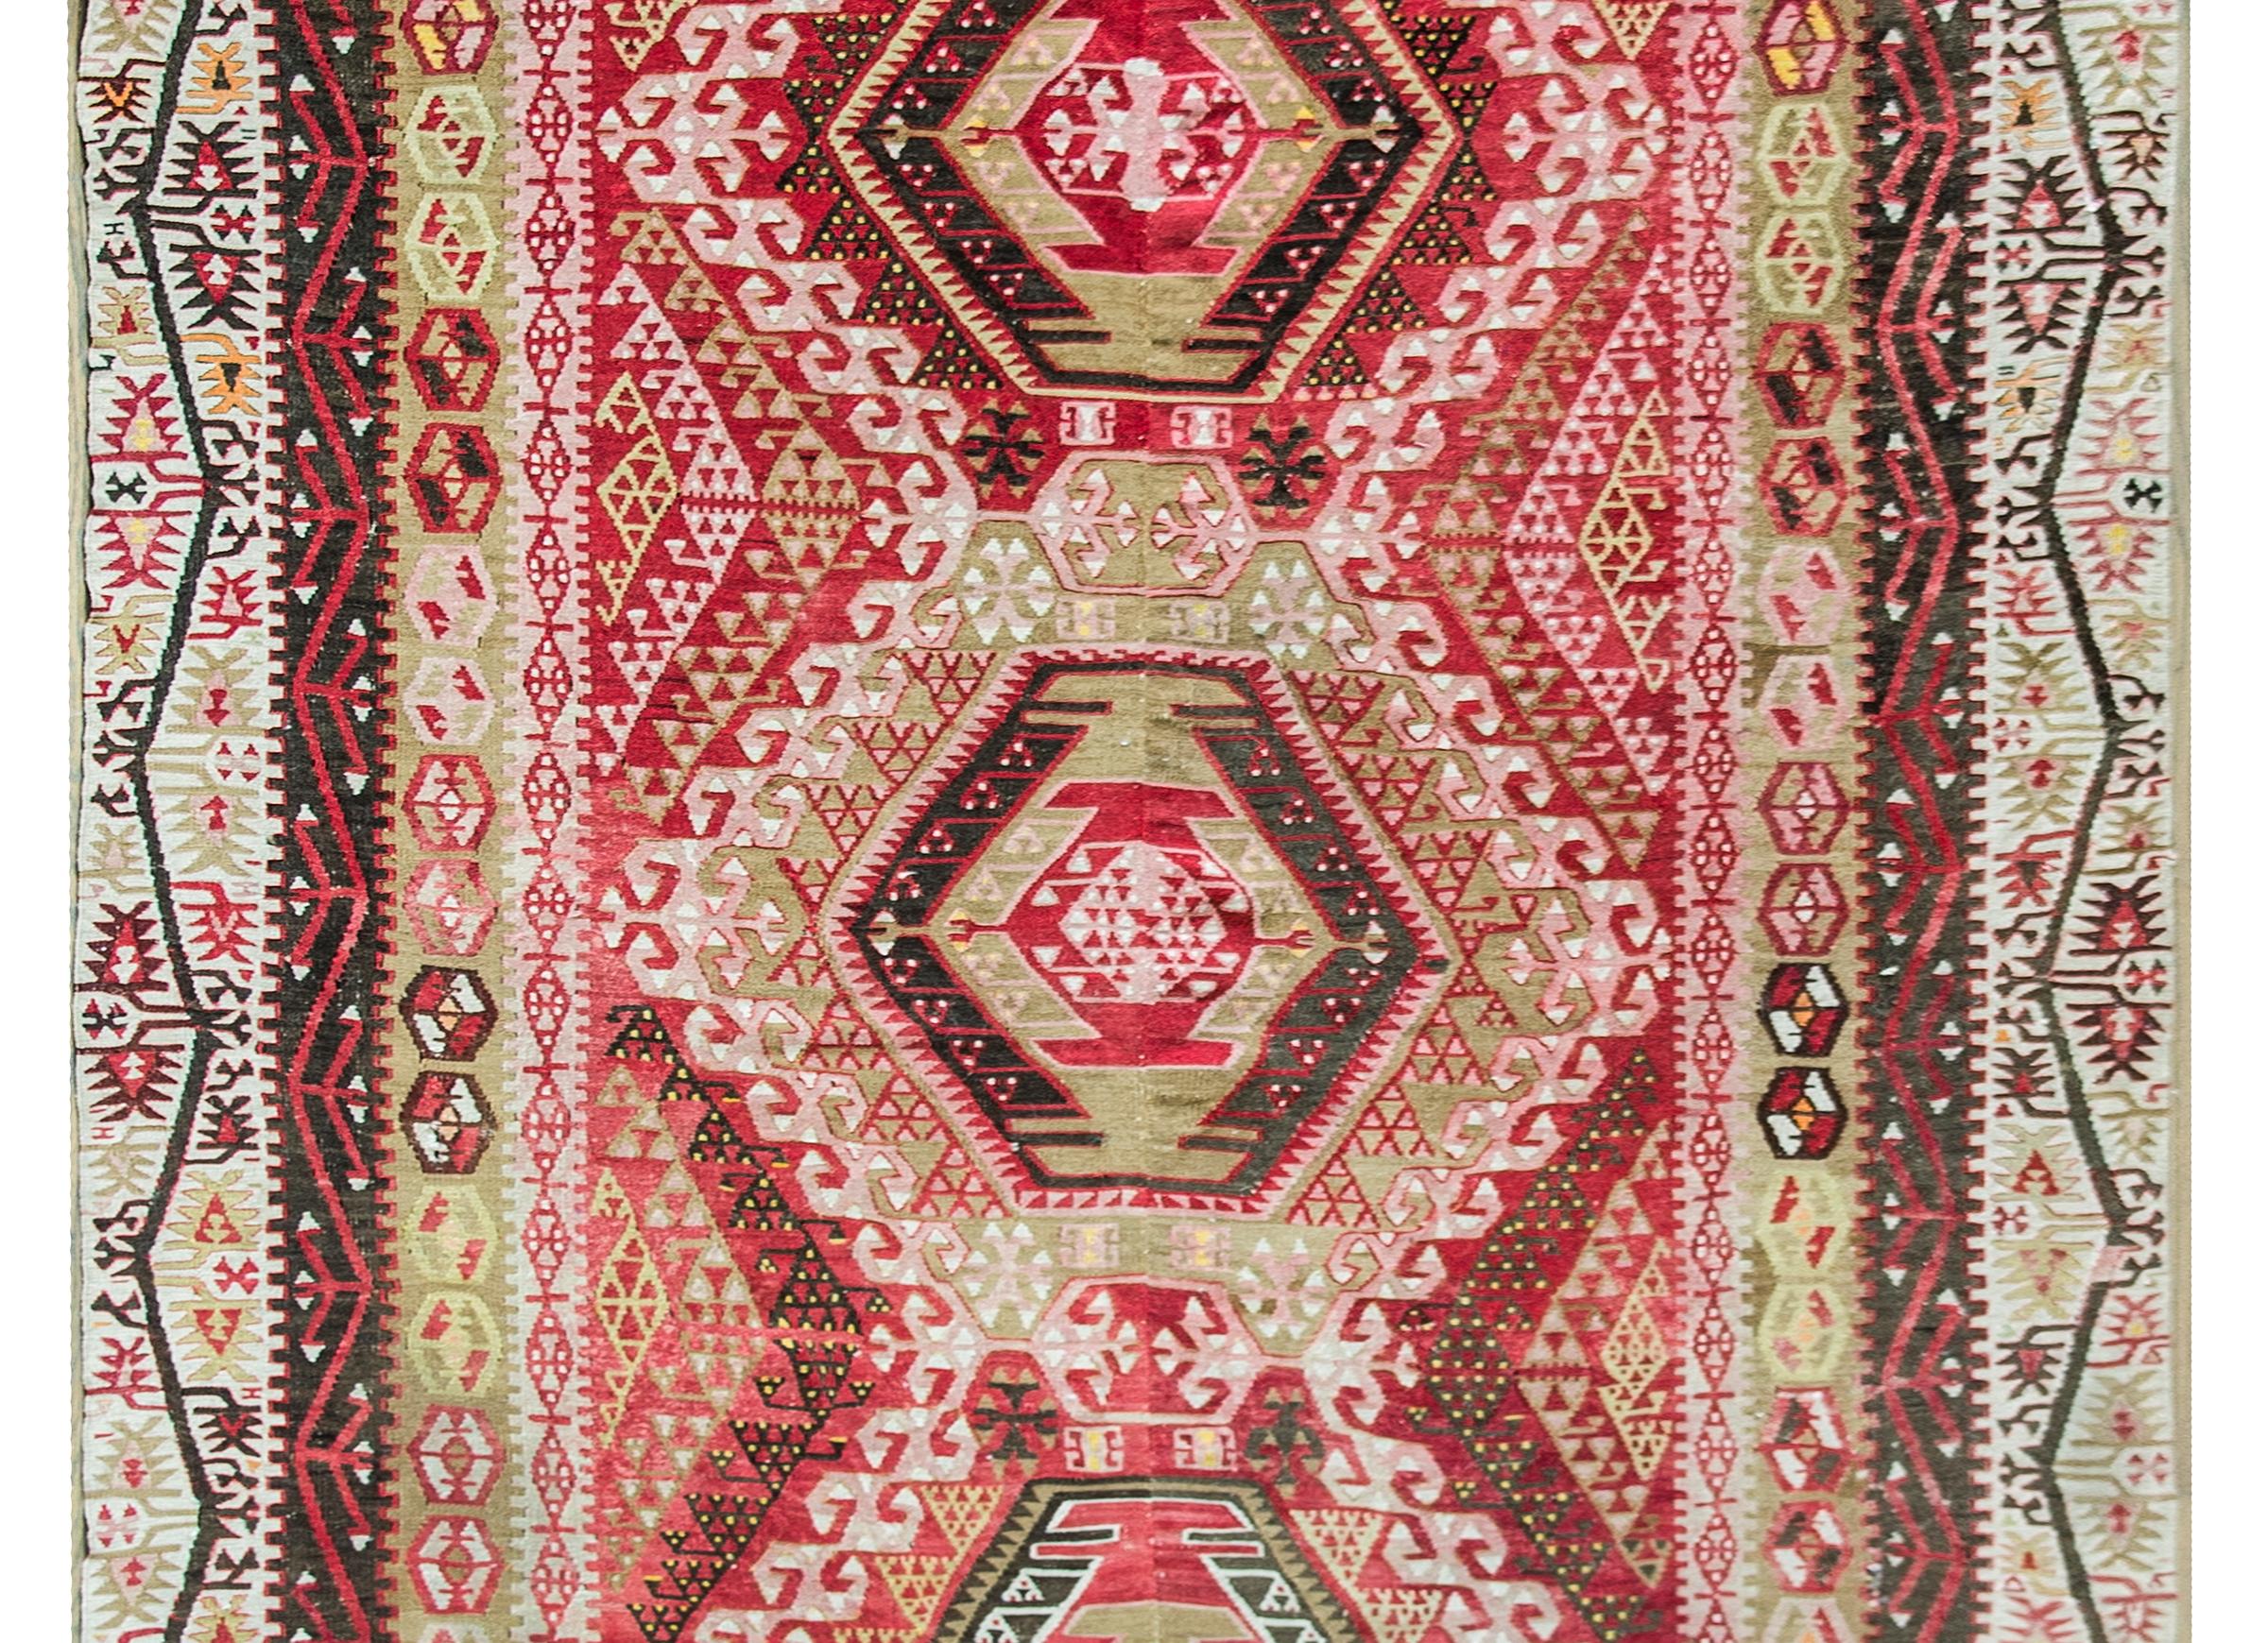 A wonderful early 20th century Anatolian Turkish rug with five large diamond medallions flanked by an incredible field of stylized flowers and vines all woven in beautiful pinks, crimsons, whites, and browns. The border is equally as stunning with